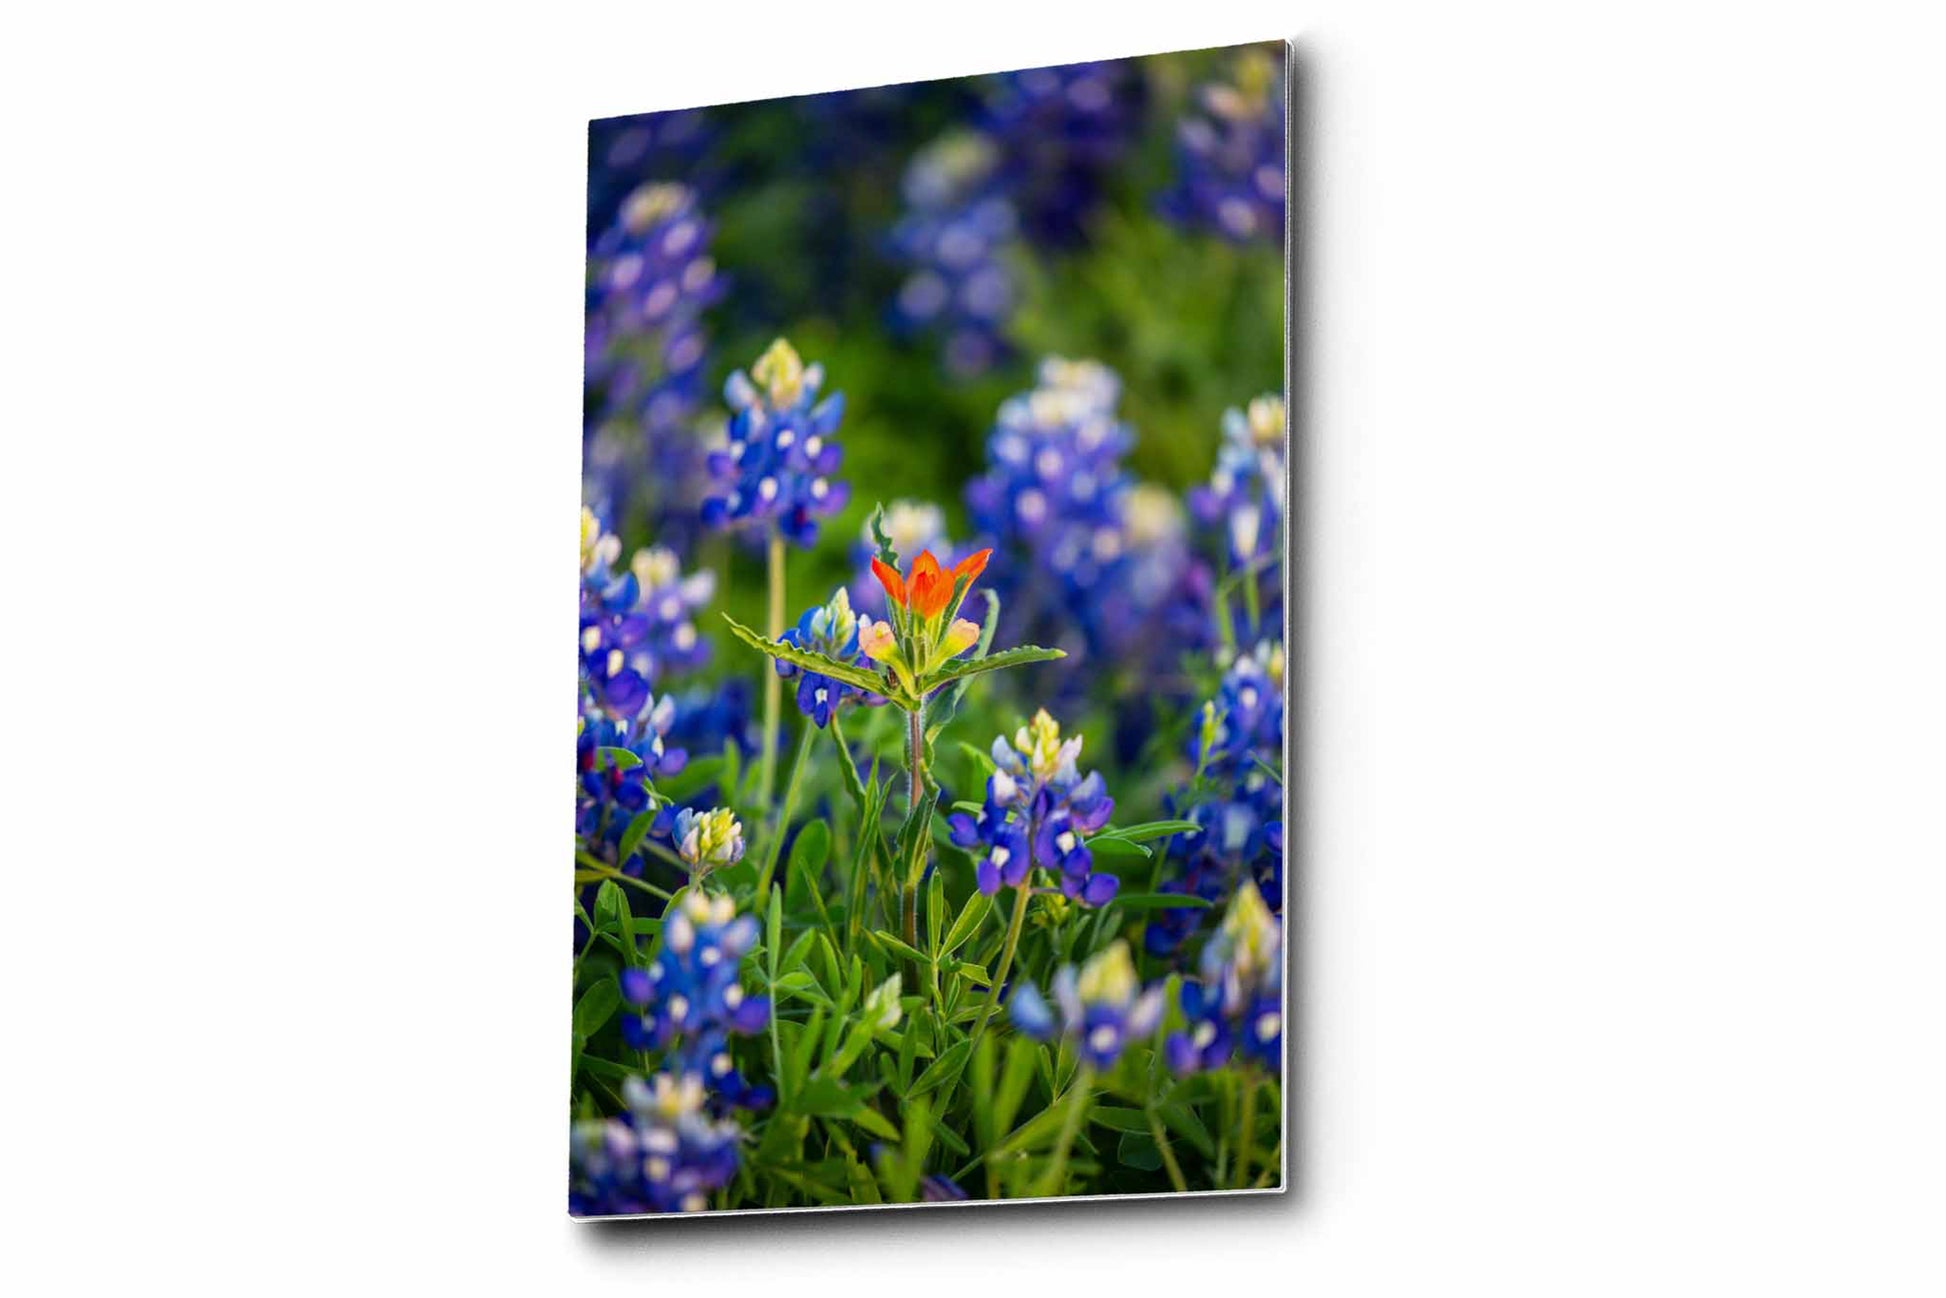 Vertical floral metal print on aluminum of a solitary Indian paintbrush wildflower standing out in bluebonnets on a spring day in Texas by Sean Ramsey of Southern Plains Photography.